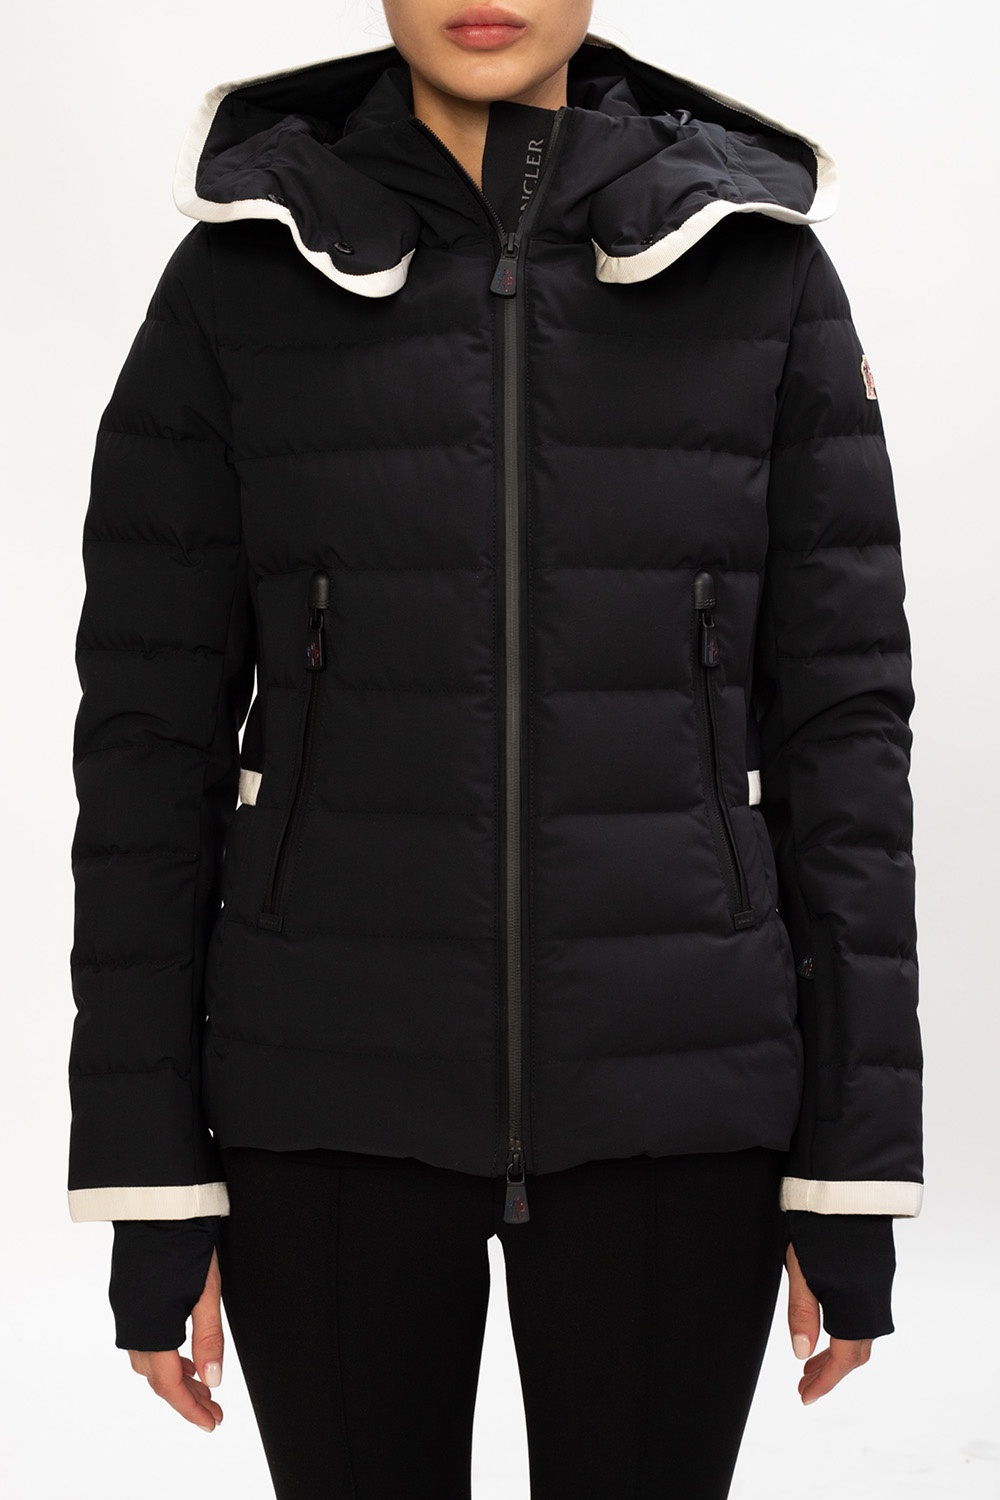 Lamoura' quilted down jacket Moncler Grenoble - Vitkac US